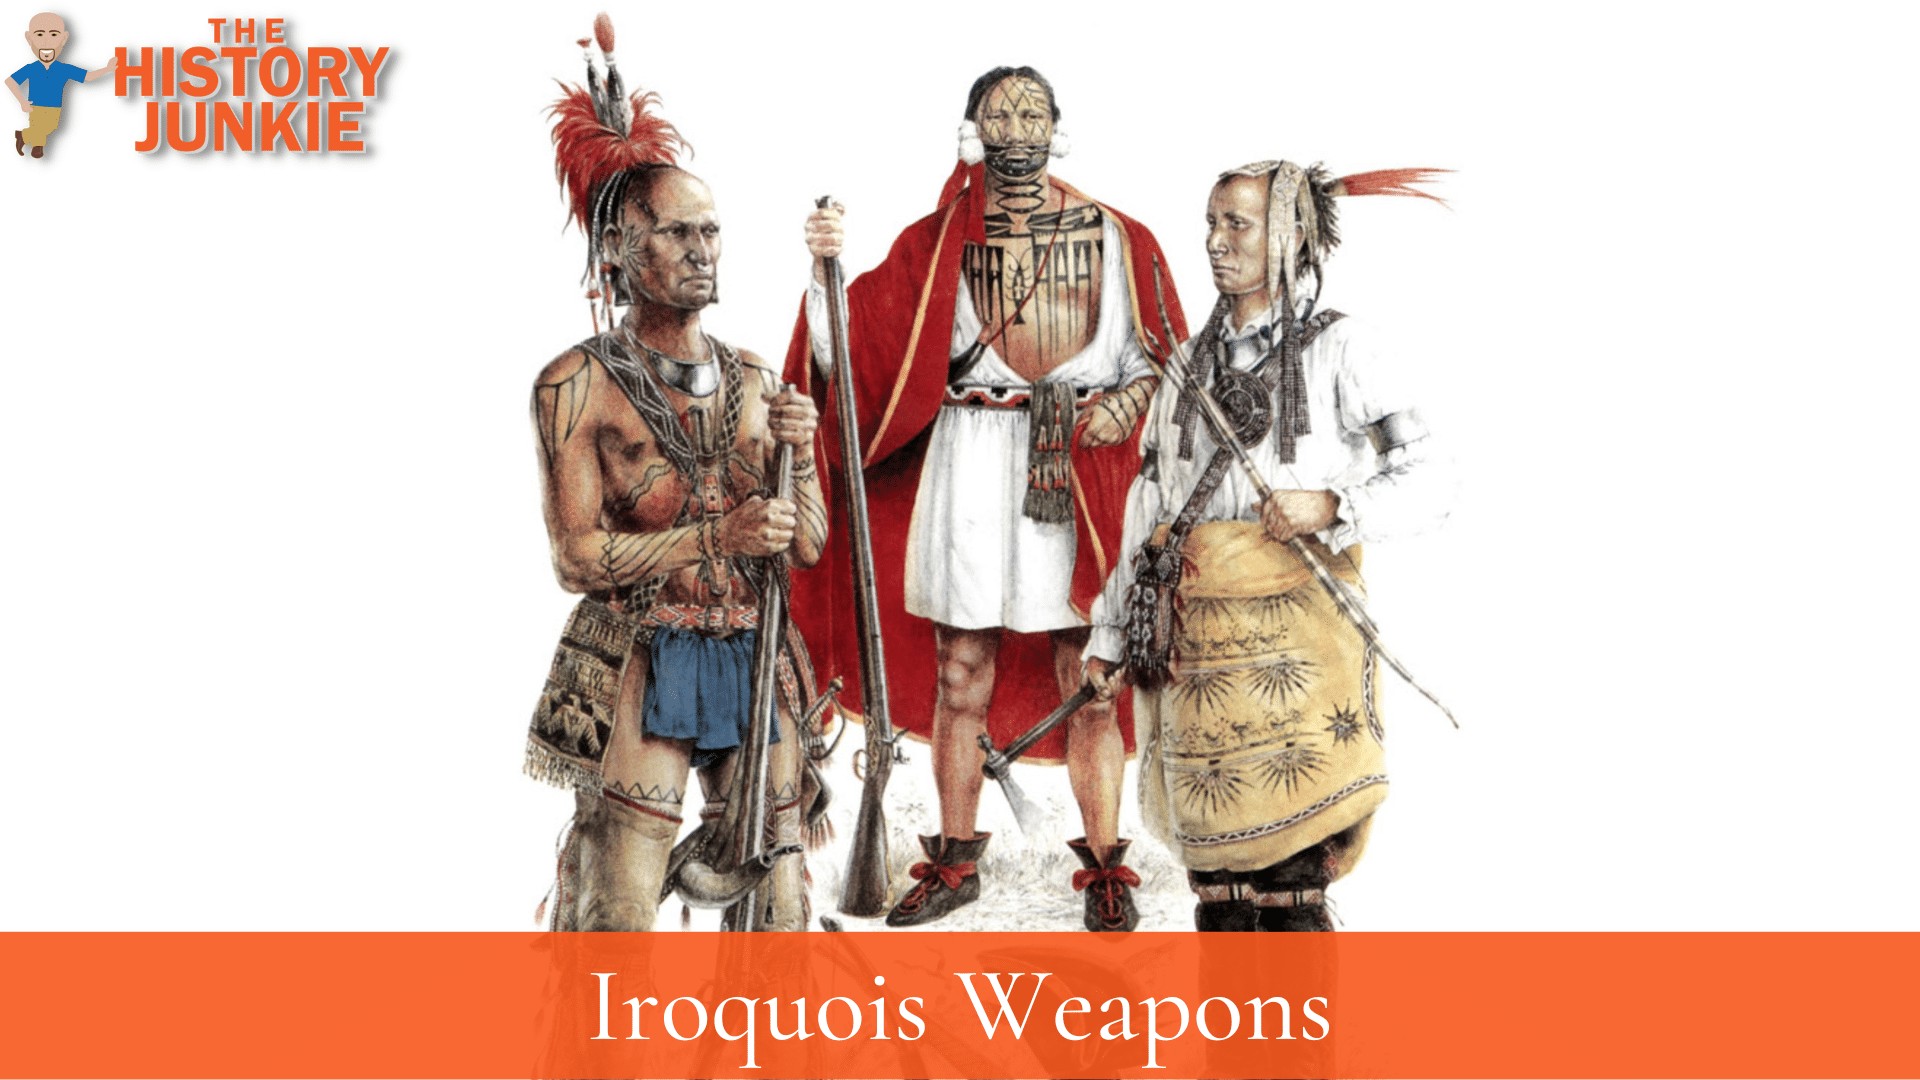 Iroquois Weapons